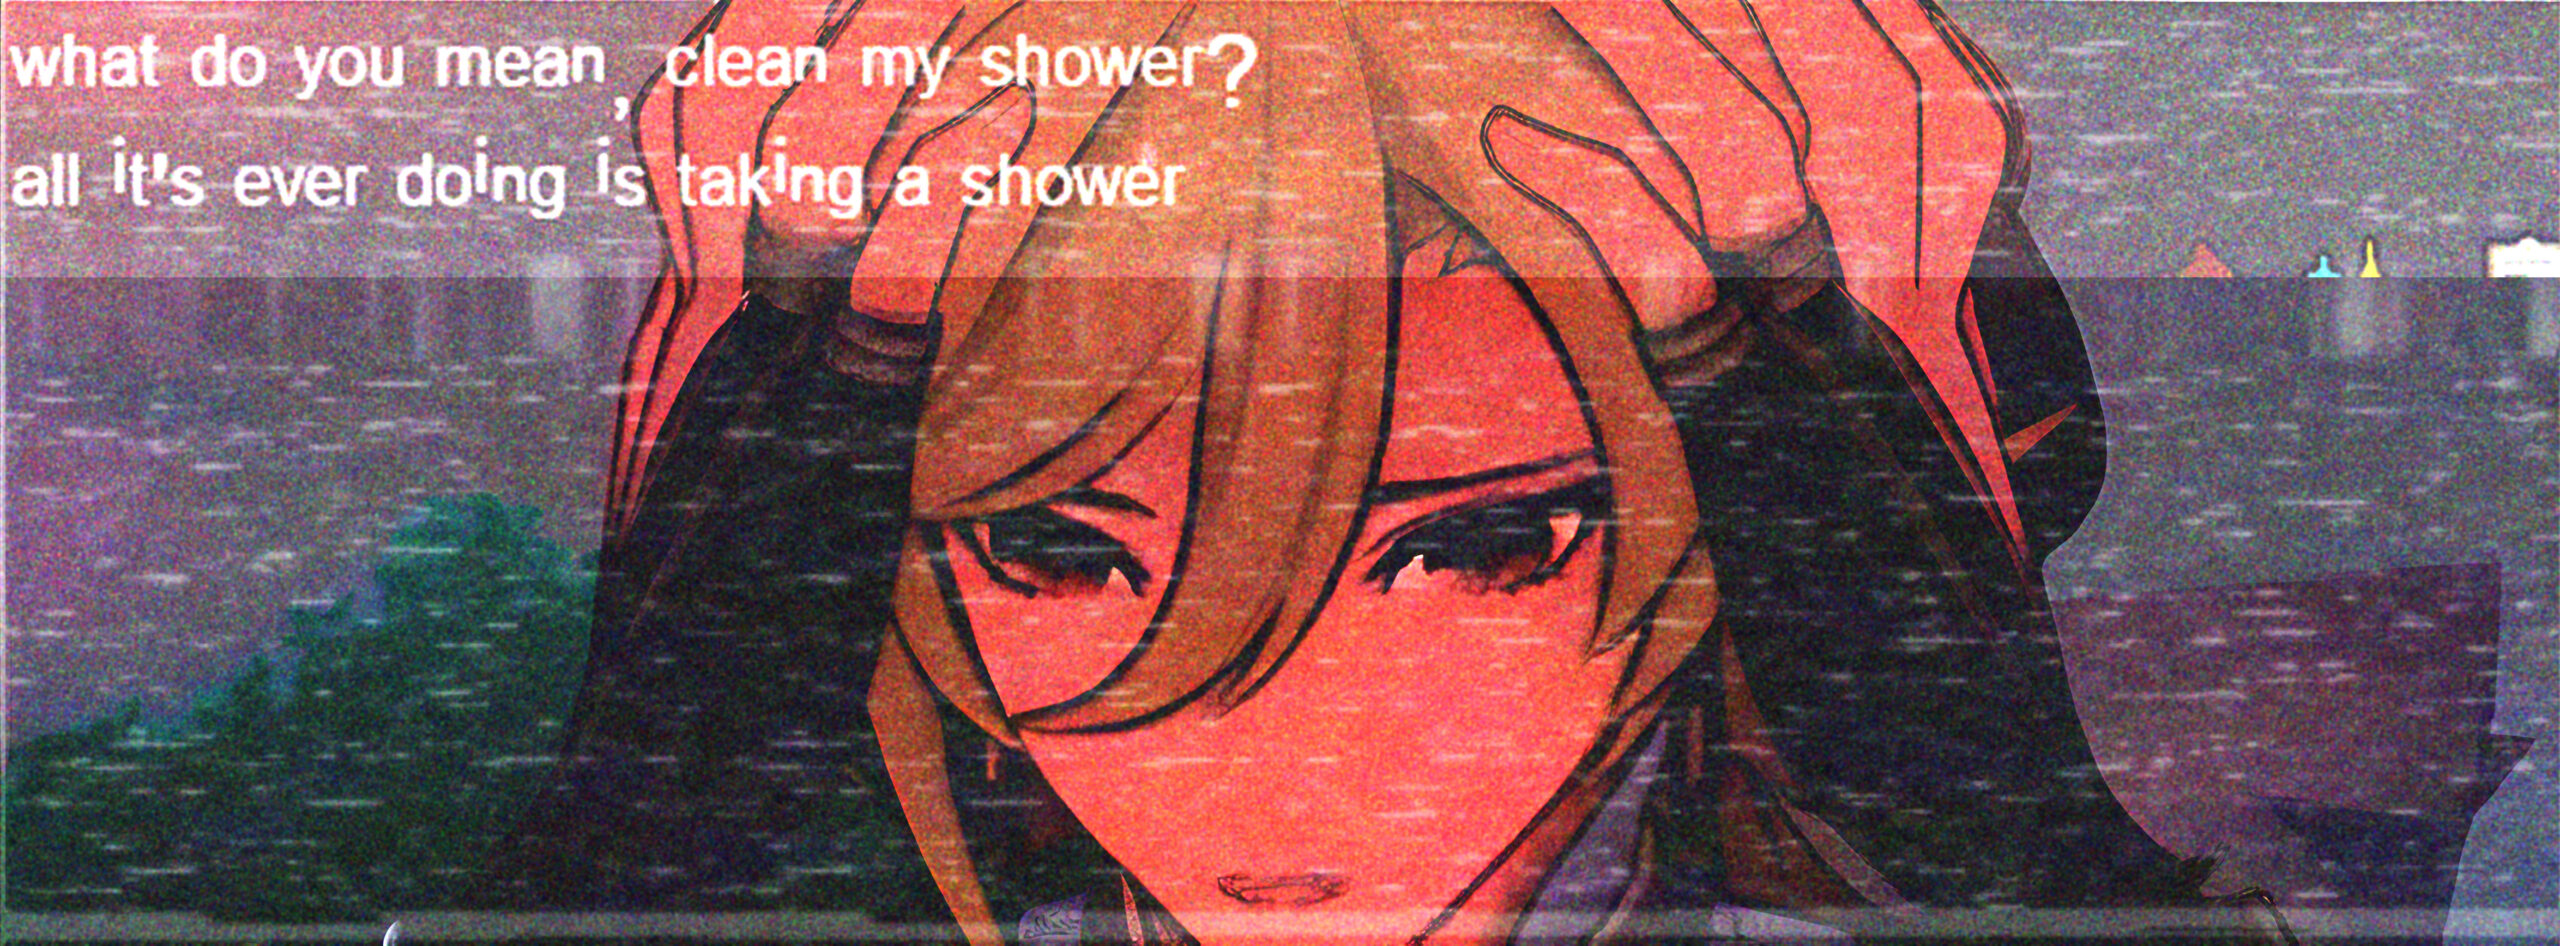 What do you mean, clean my shower?